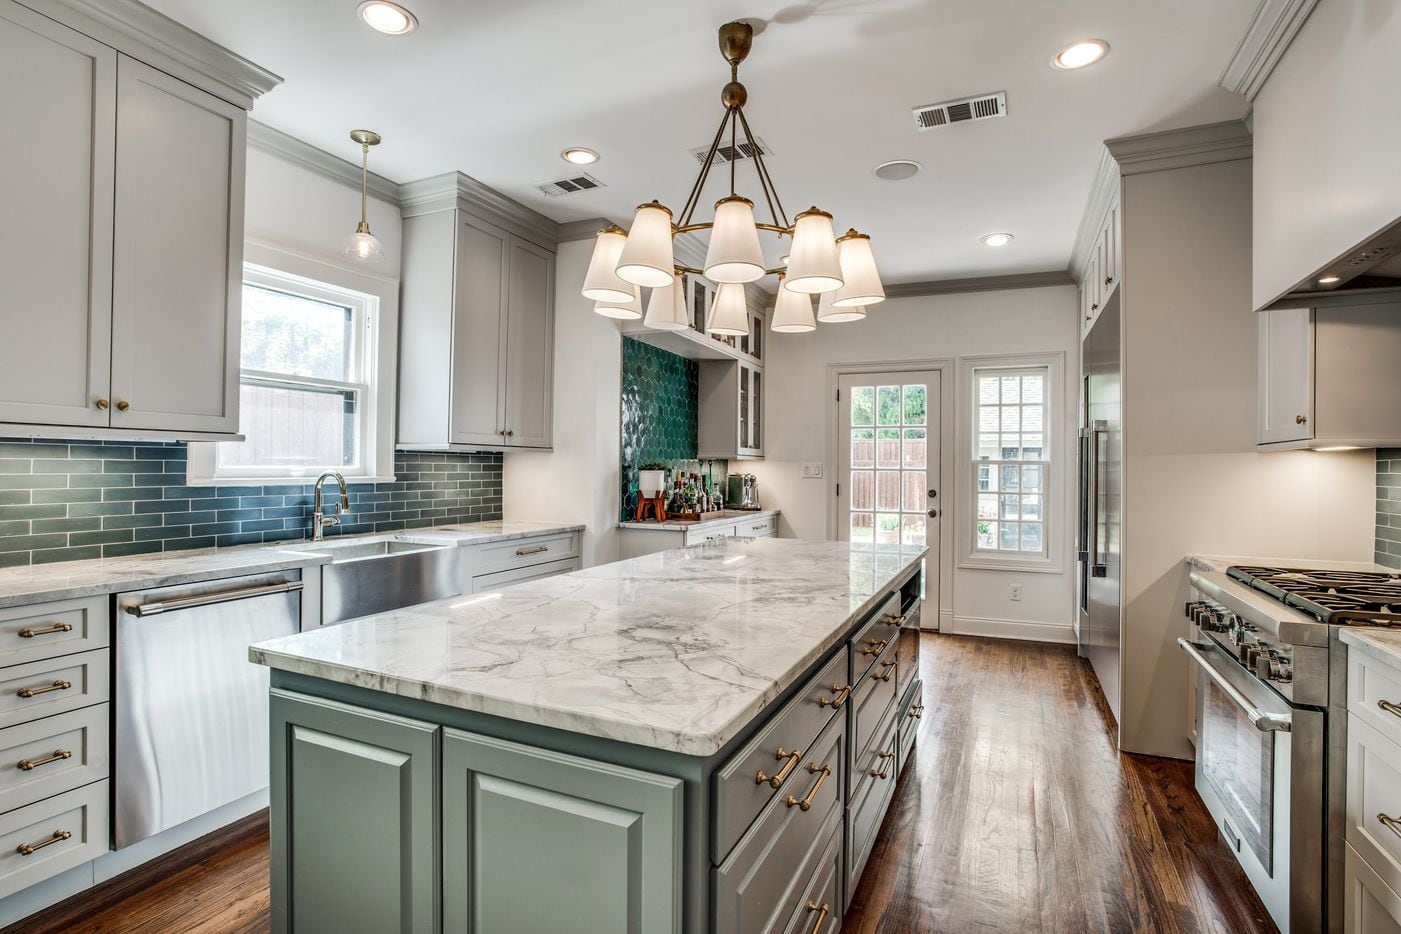 Take a look at the kitchen inside the home at 6521 Lakeshore Drive in Dallas.